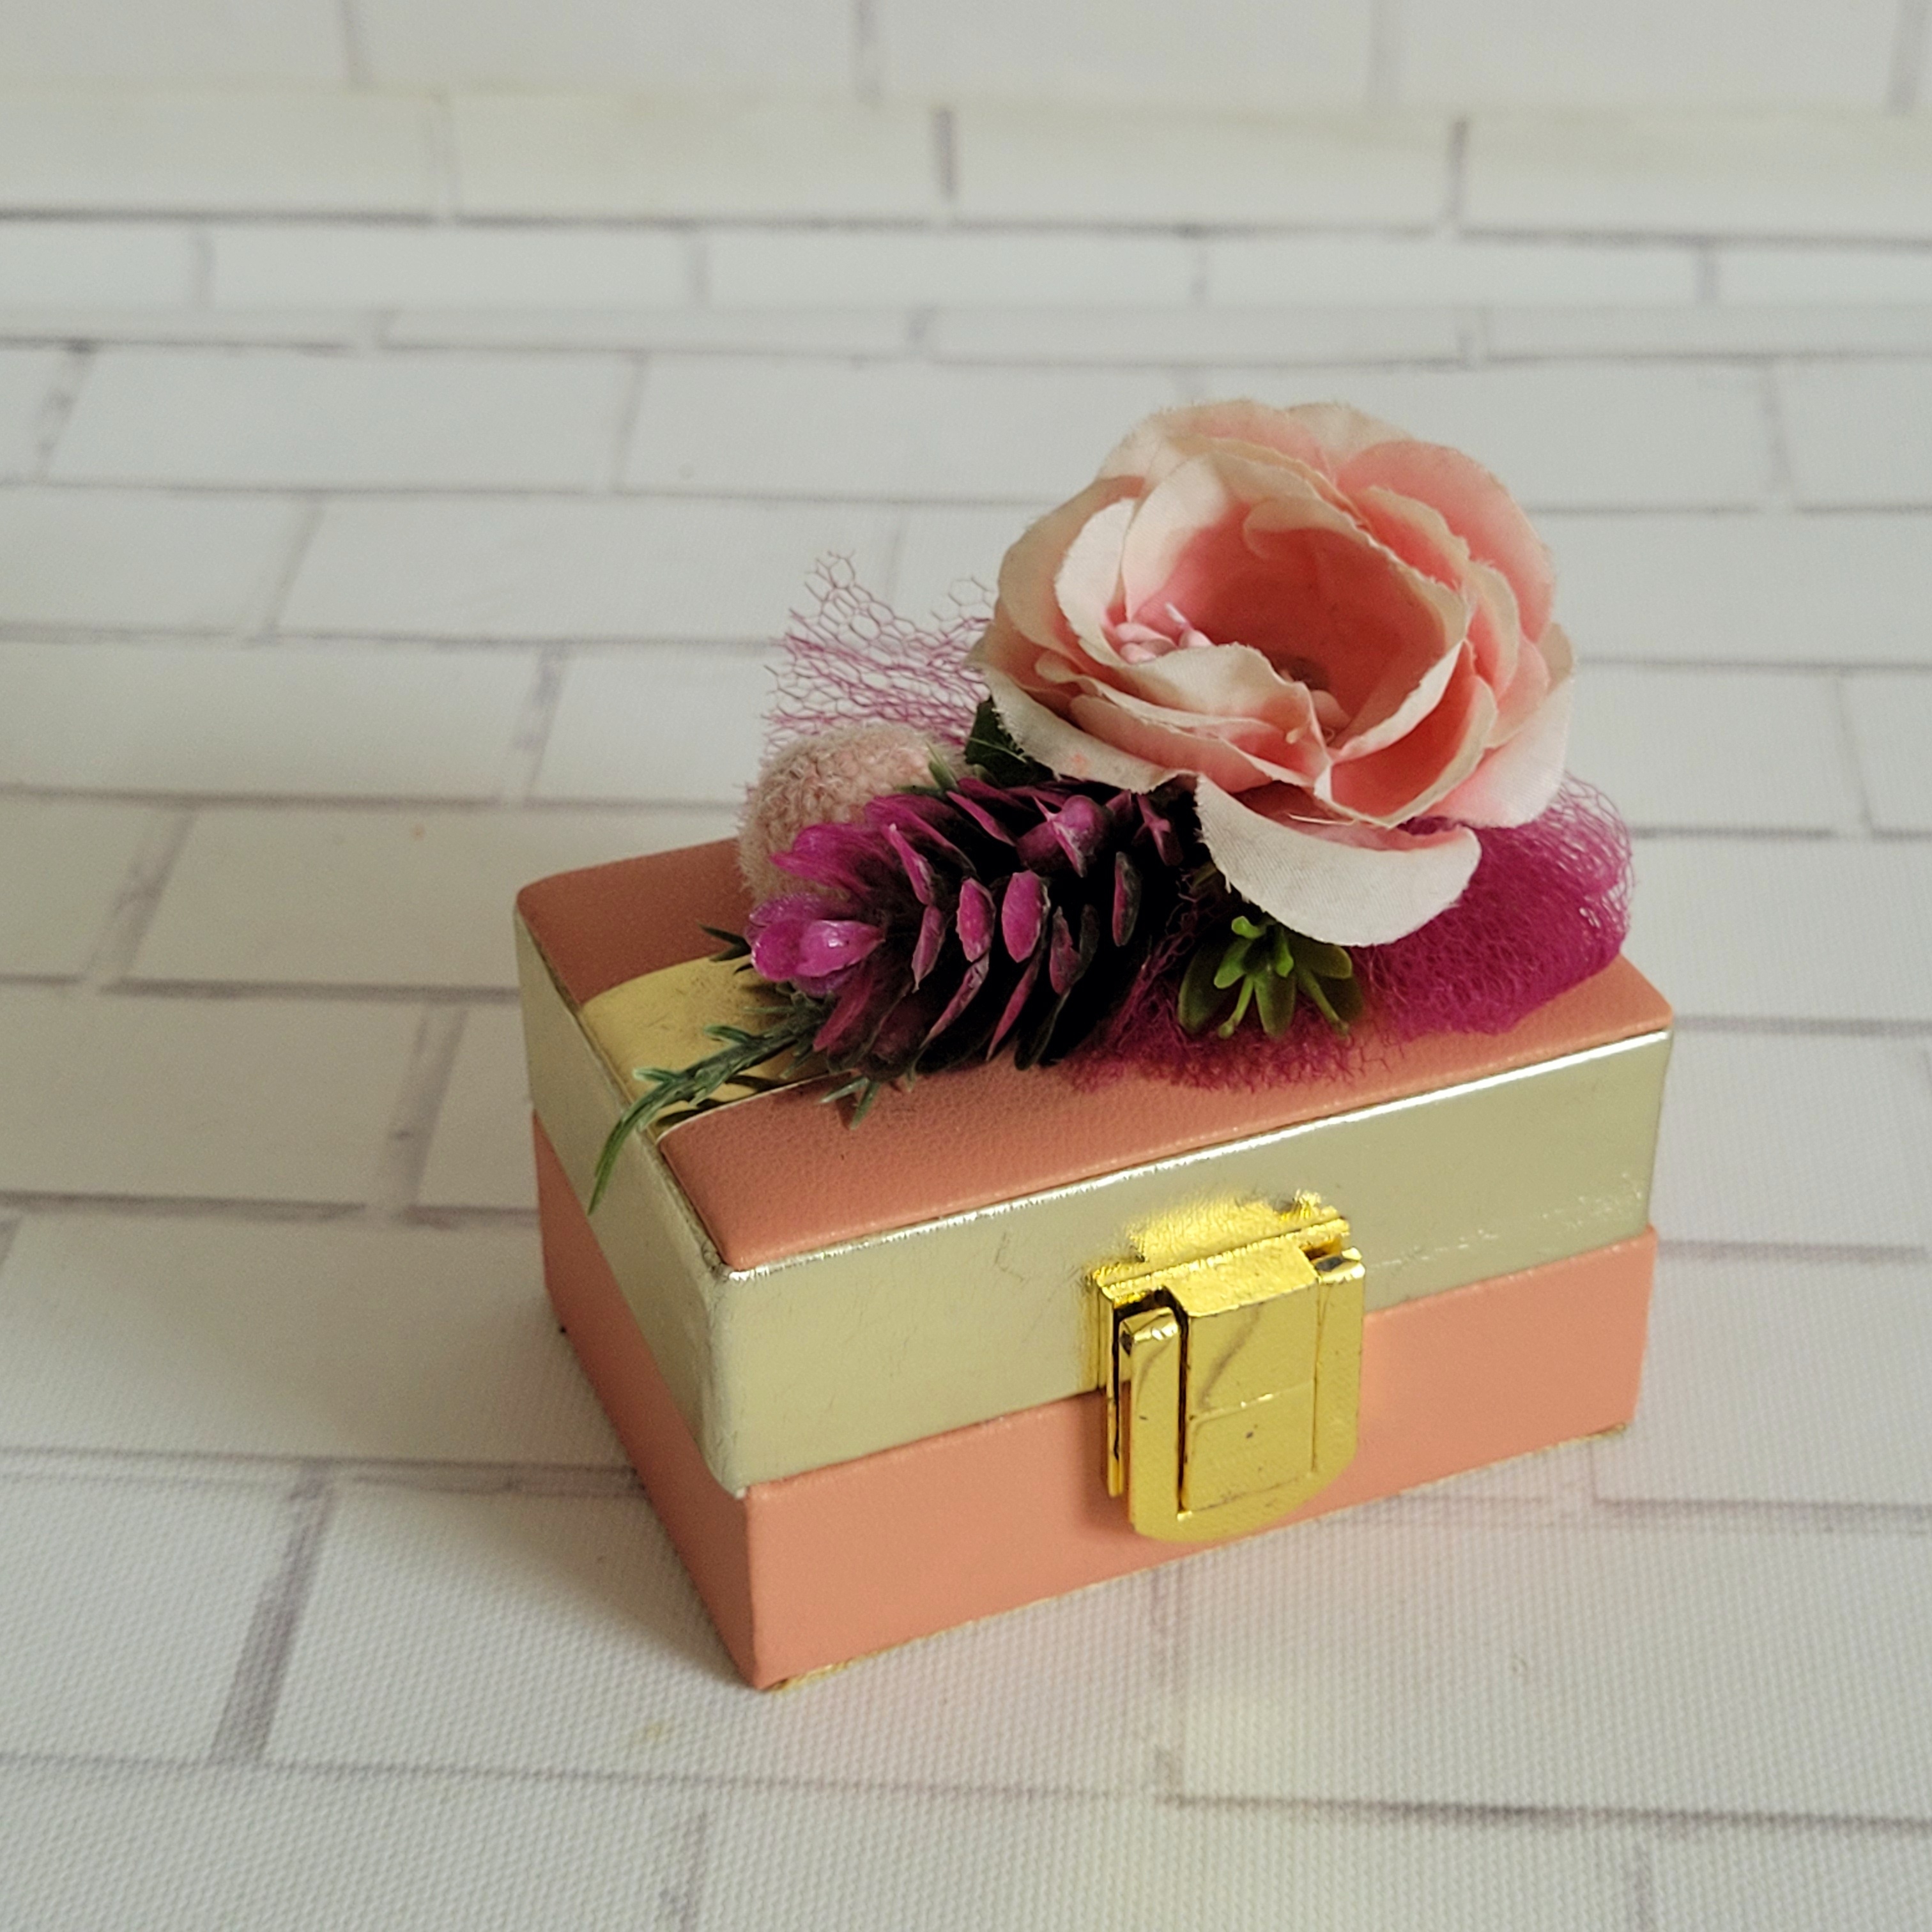 Floral art | Coral Coin Box Leather Stuff with Artifical Flower undefined